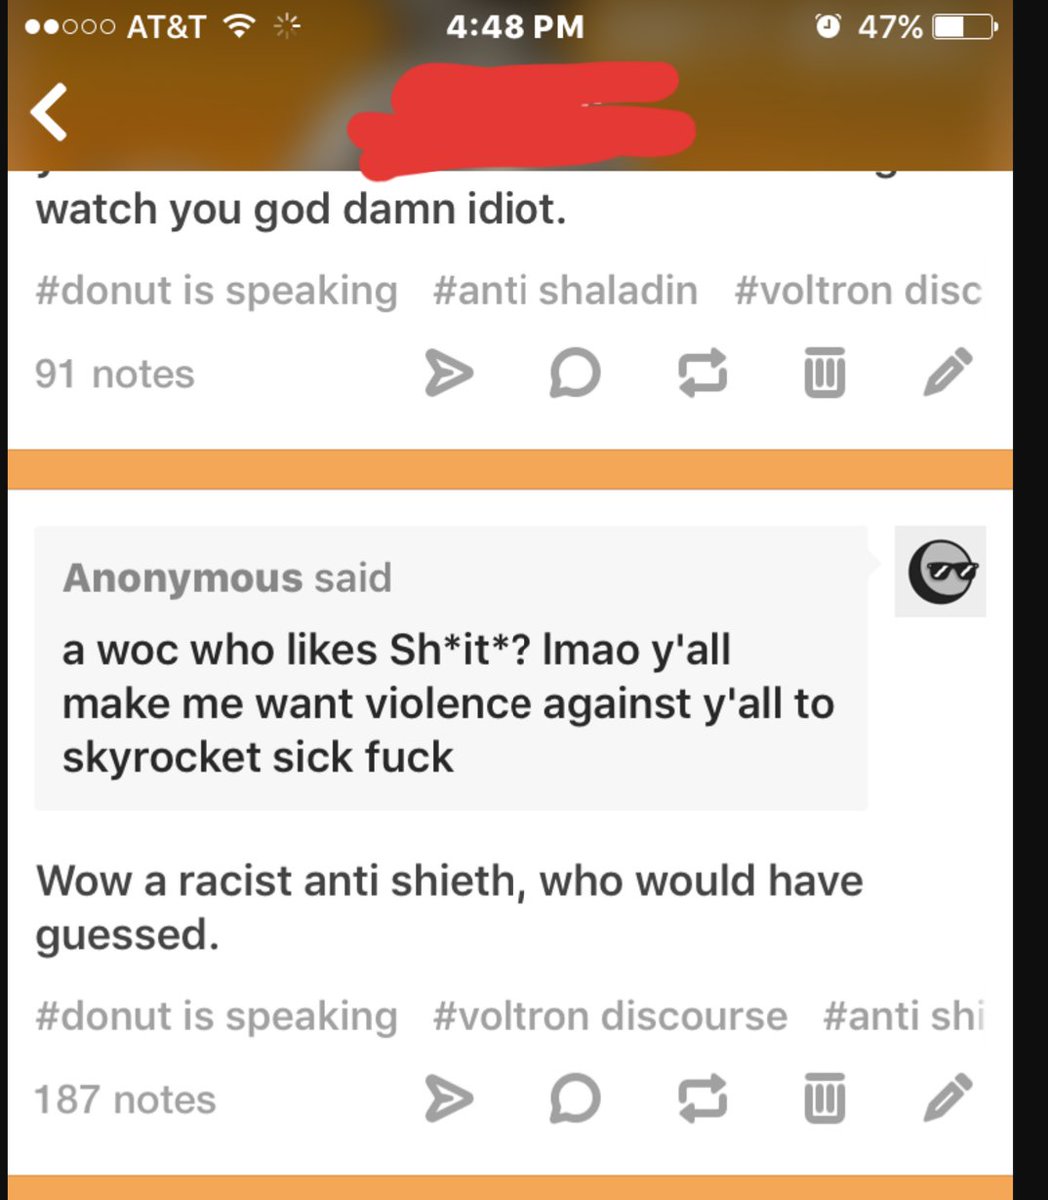  #HoldFancopsAccountableTW: racist and anti-semitic slursBecause the racism that finds it's way into fanpol spaces is inexcusable. There is no reason to fling slurs at someone because you disagree with them.